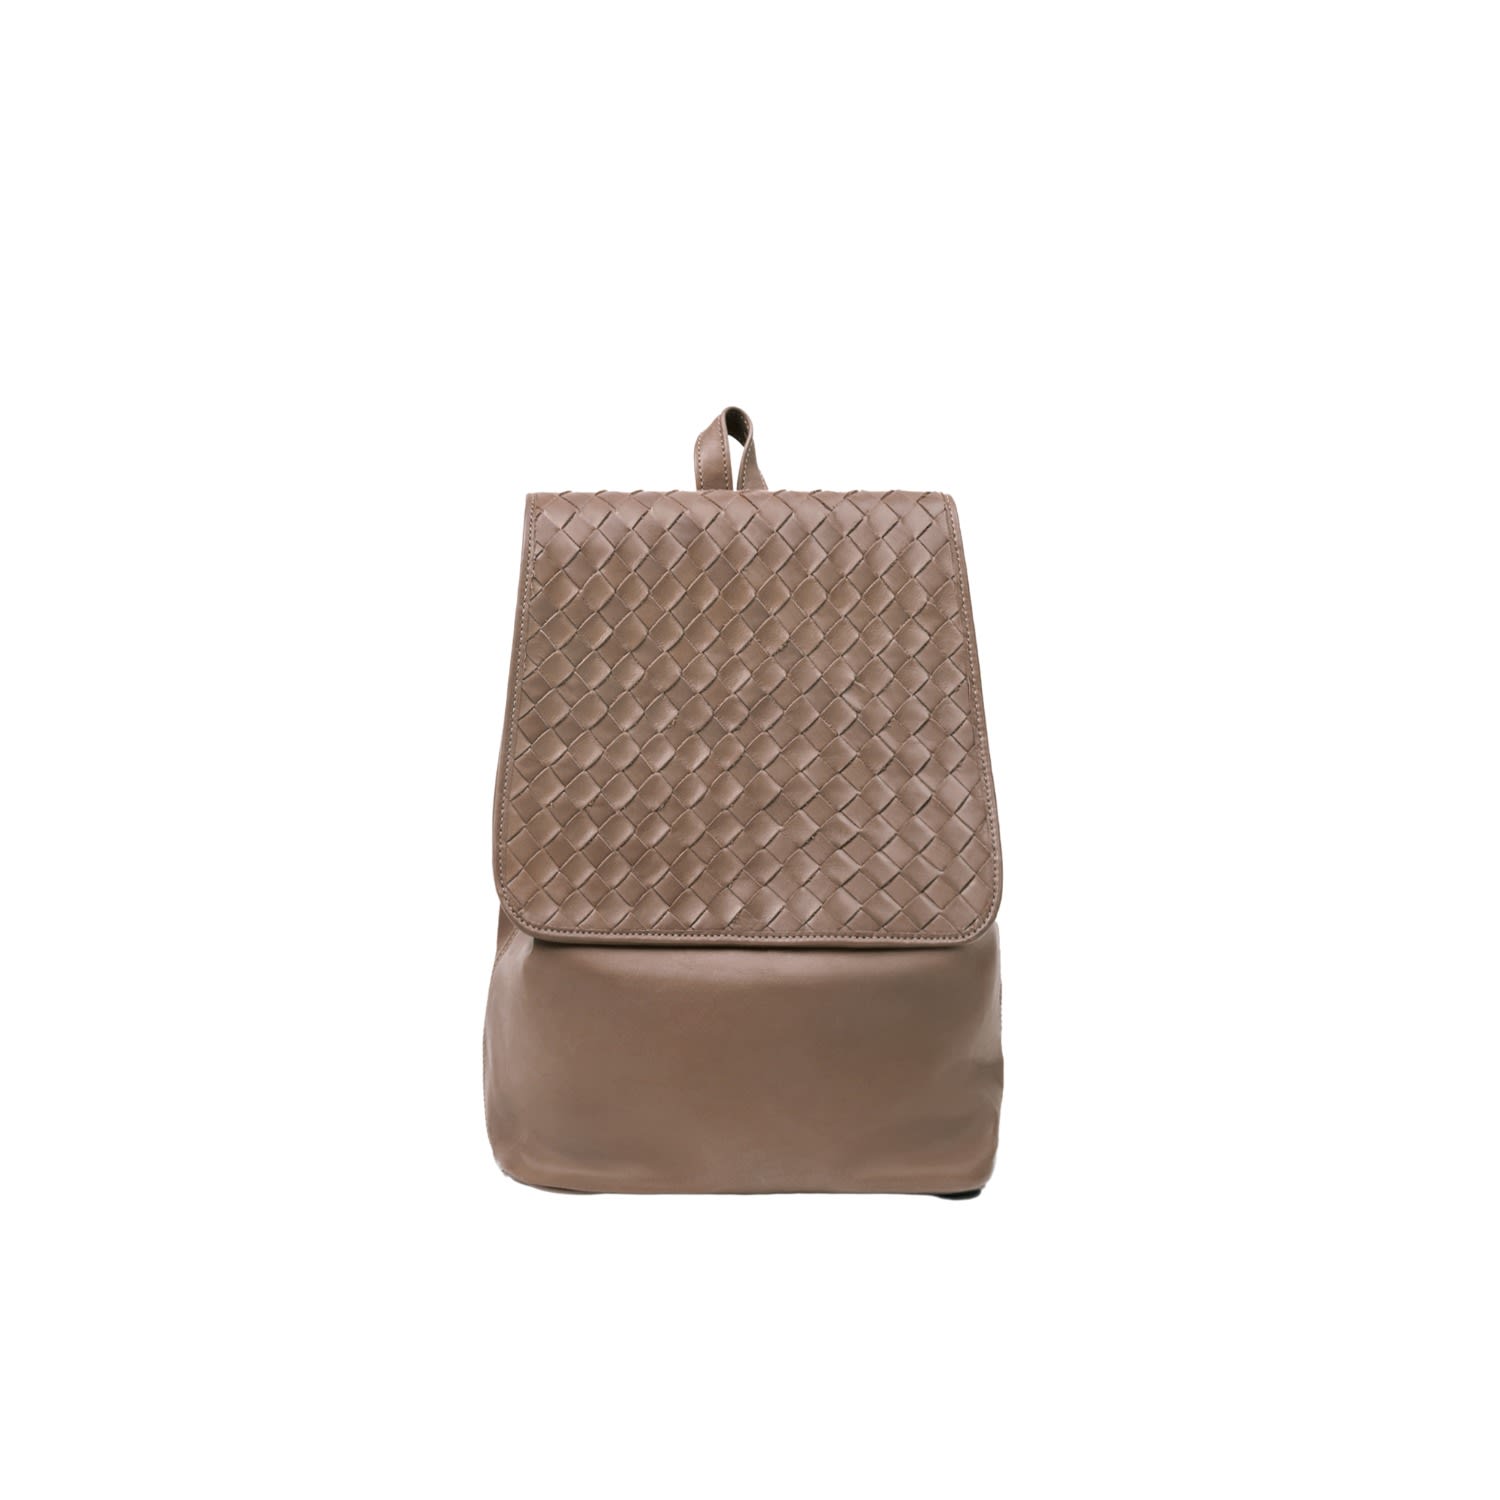 Women’s Neutrals Woven Leather Backpack Taupe Deux Mains